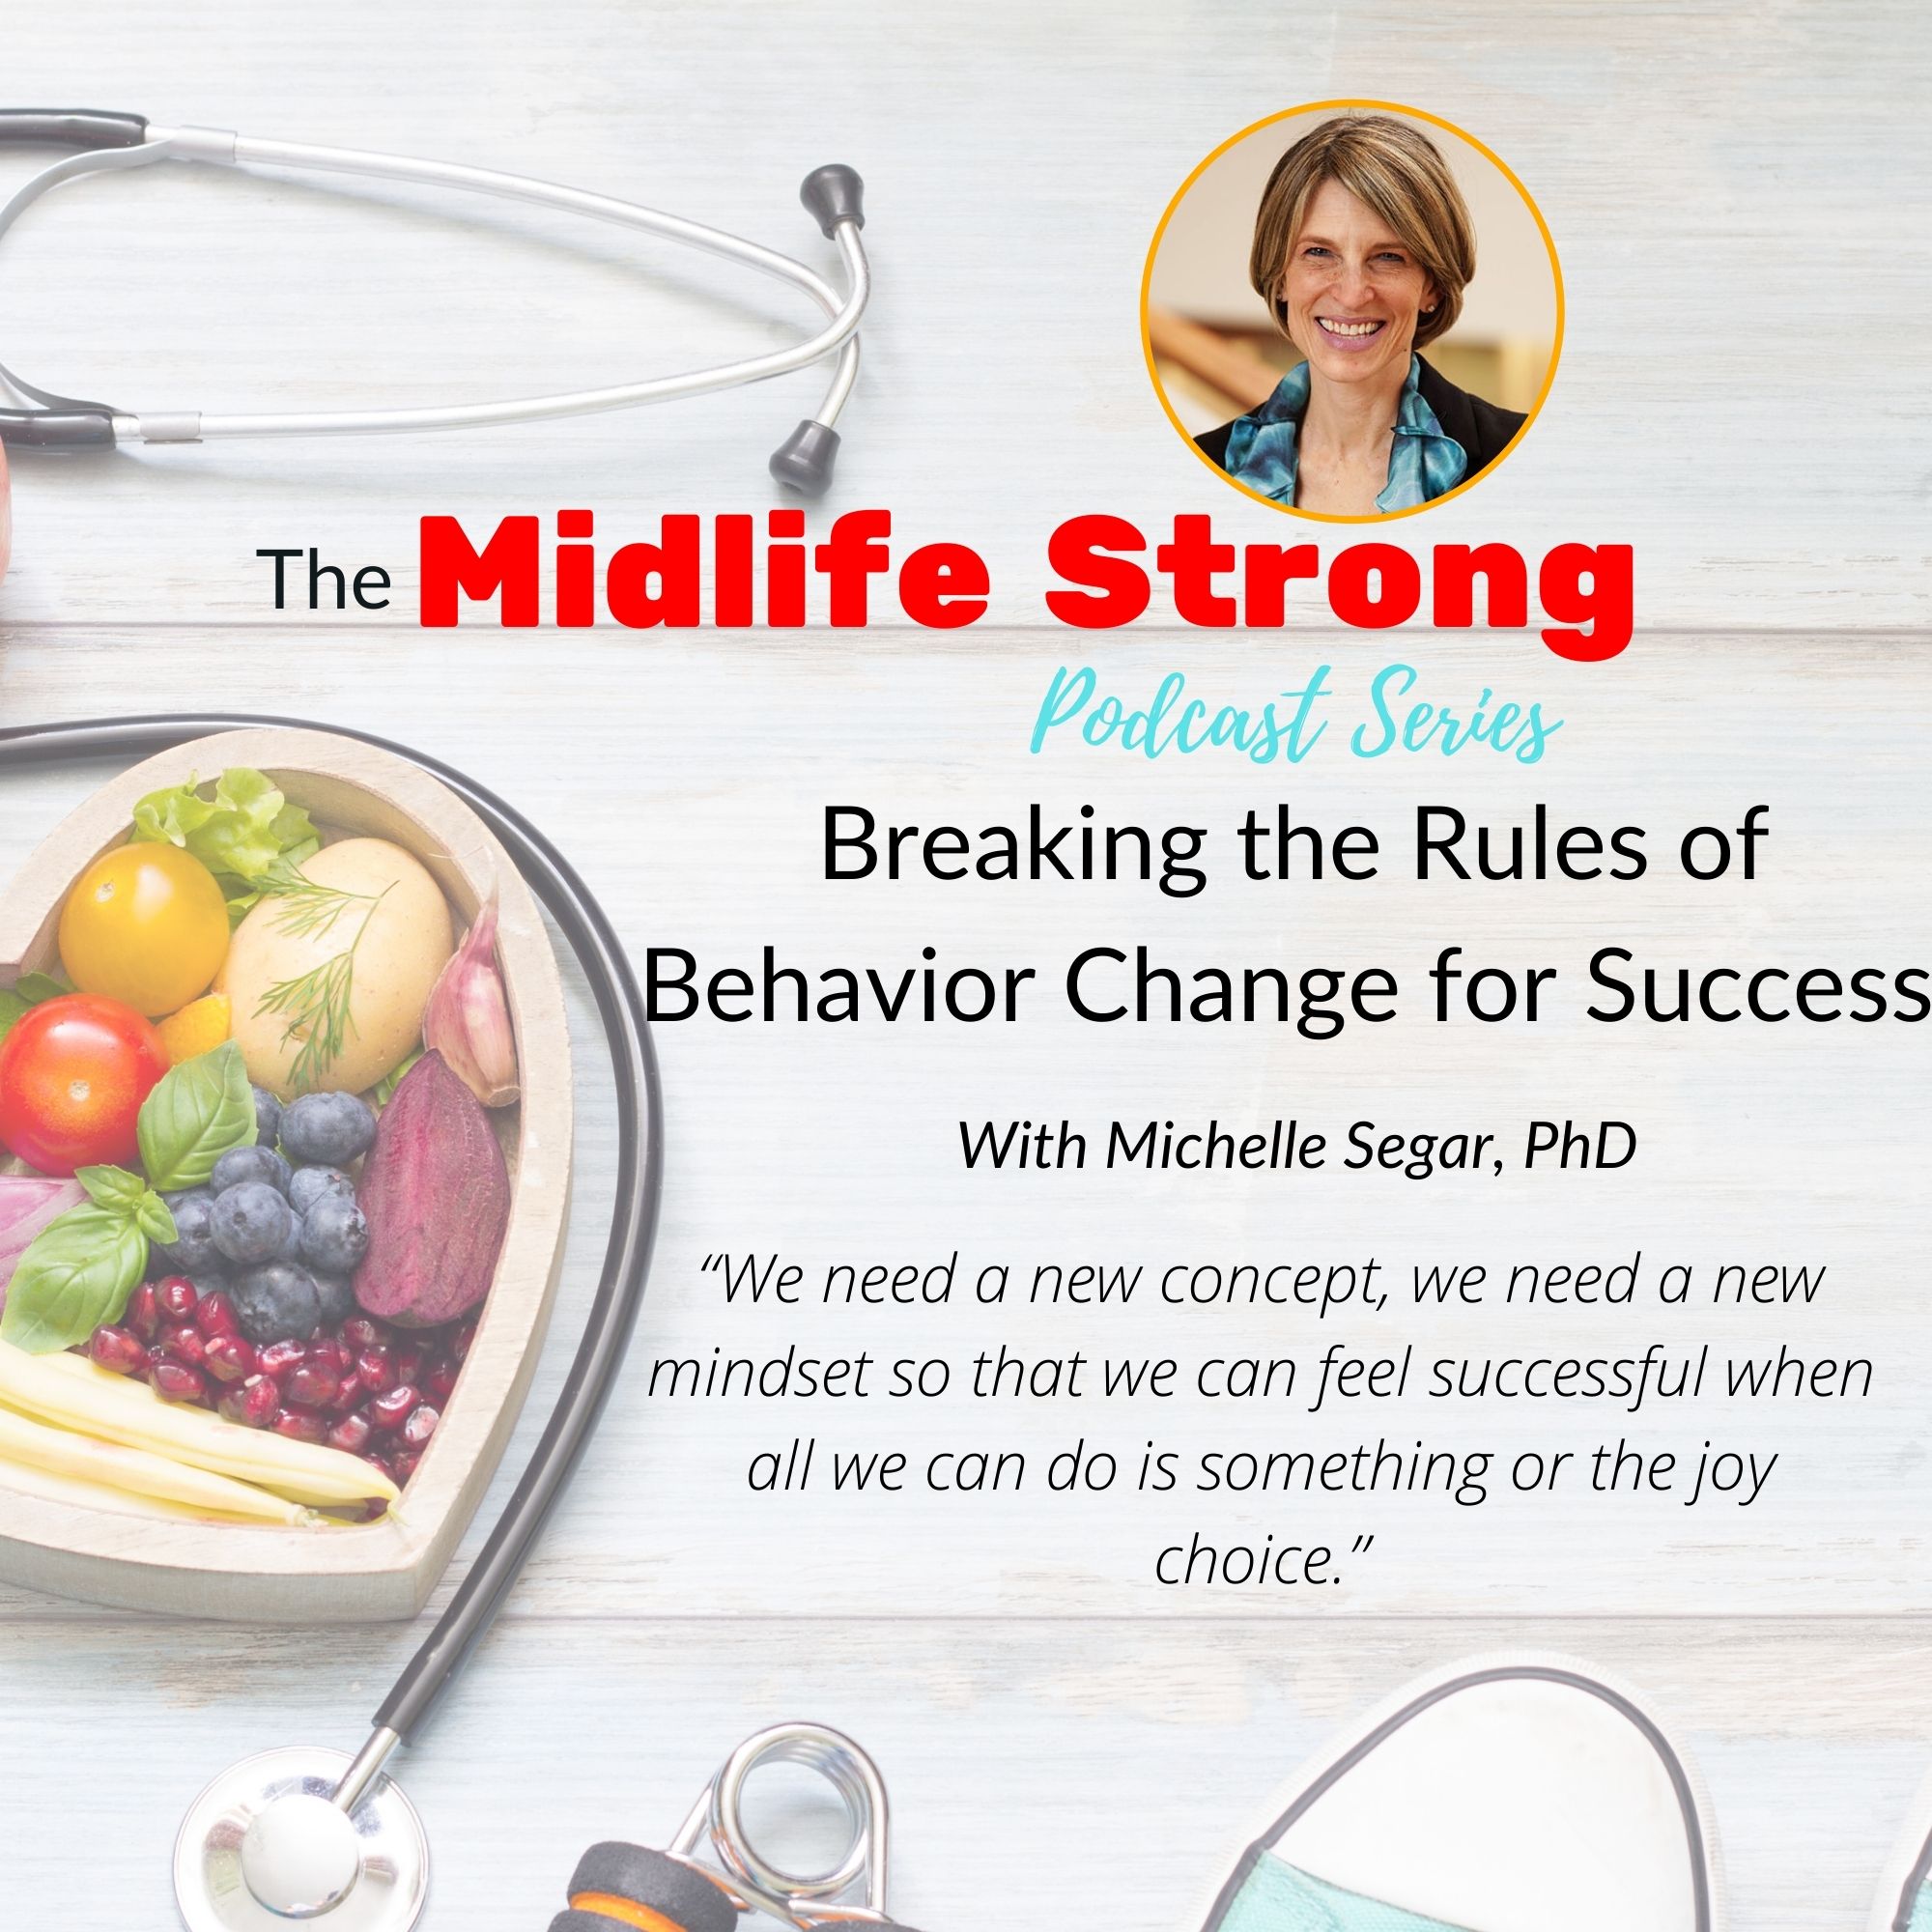 picture of Michelle Segar with text "Breaking the Rules of Behavior Change for Success"